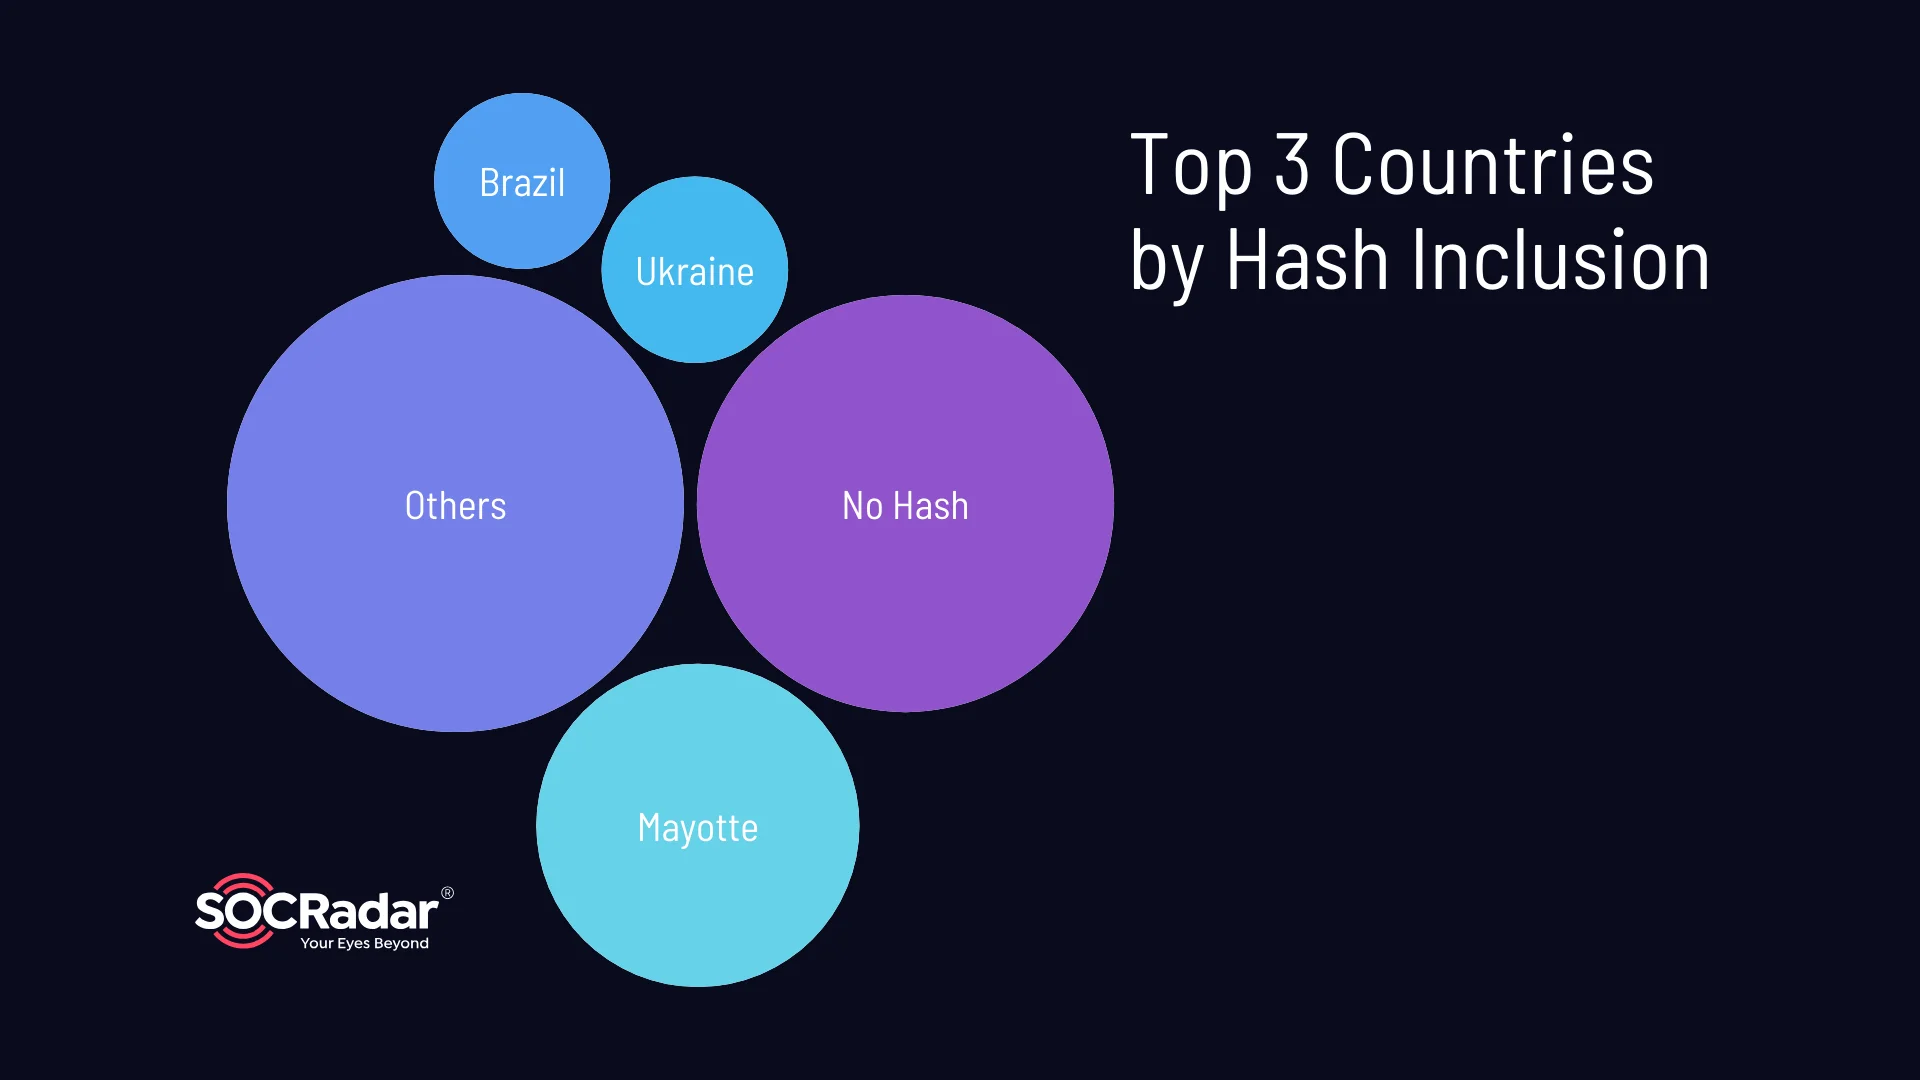 Top 3 countries by hash inclusion